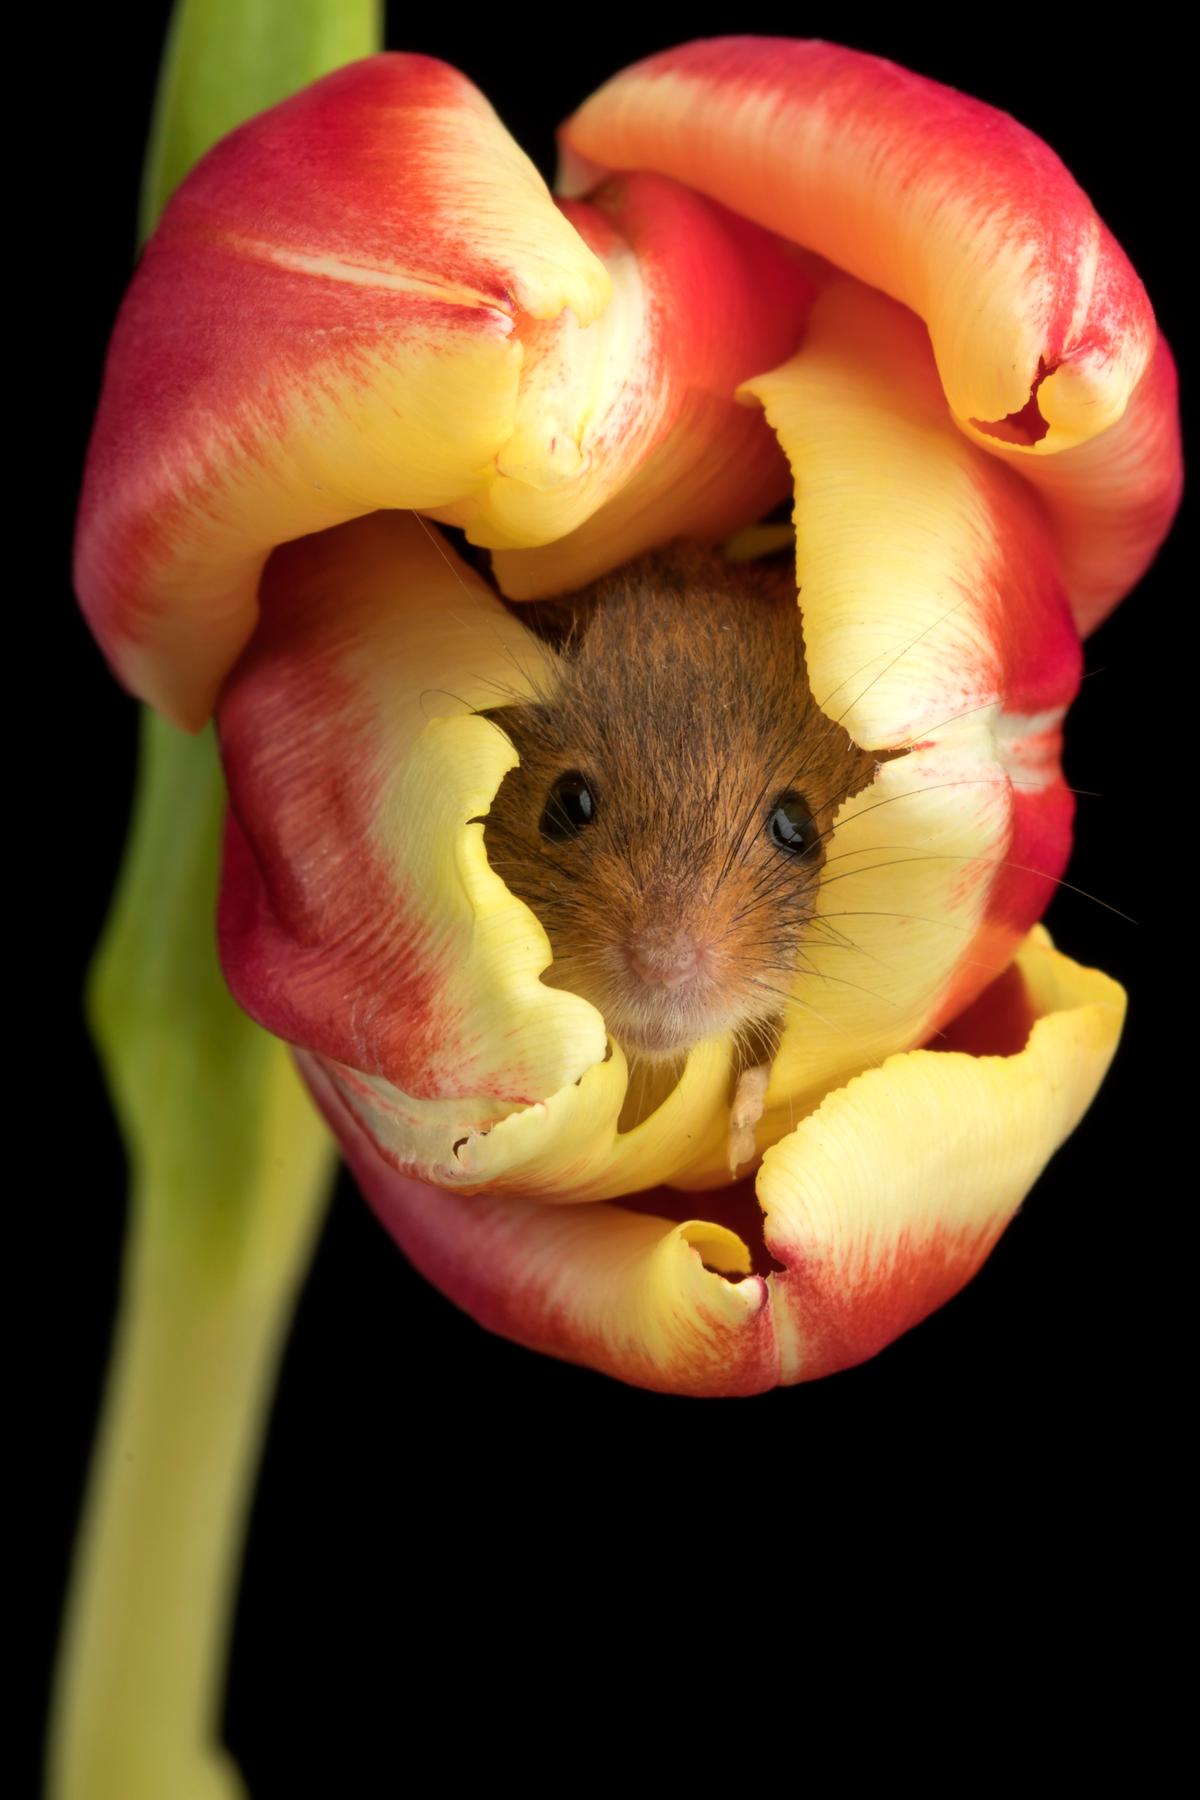 Harvest mice tiptoeing in tulips was captured in 2018. (Caters News)